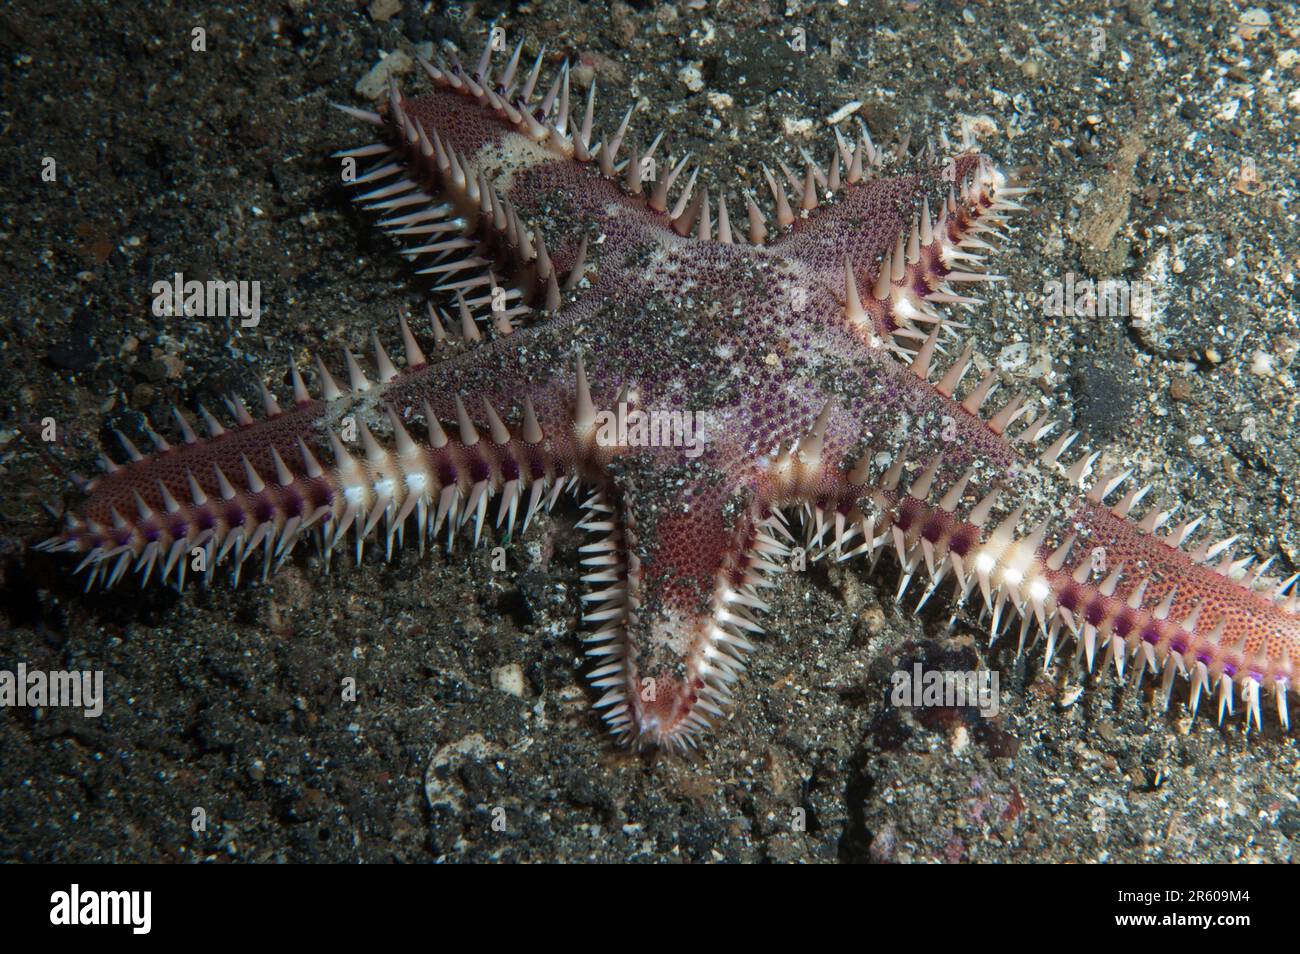 Nocturnal Comb Sea Star, Astropecten andersoni, on sand, night dive, Nudi Falls dive site, Lembeh Straits, Sulawesi, Indonesia Stock Photo